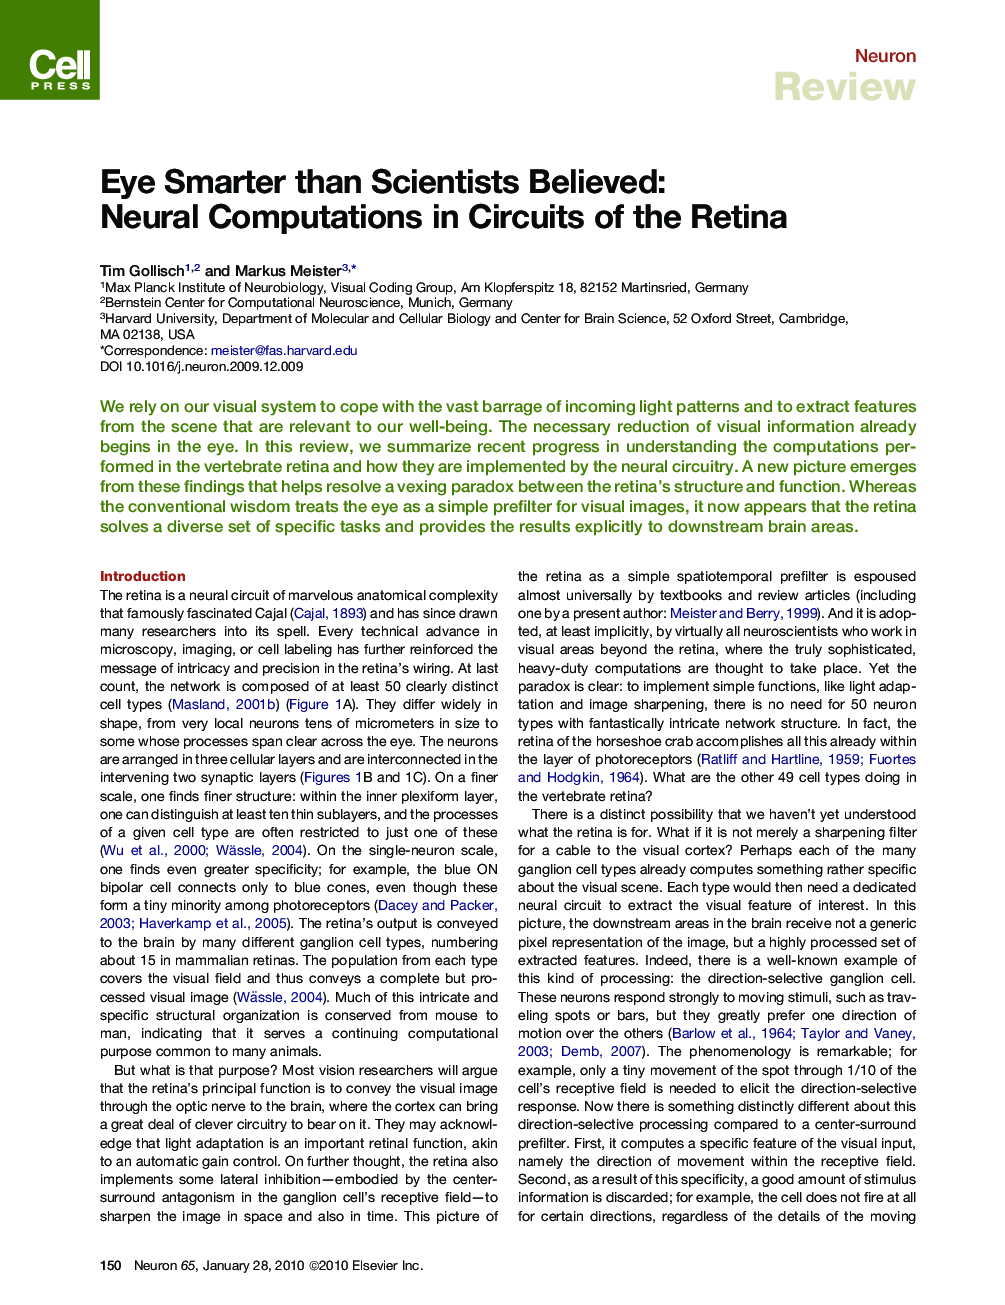 Eye Smarter than Scientists Believed: Neural Computations in Circuits of the Retina